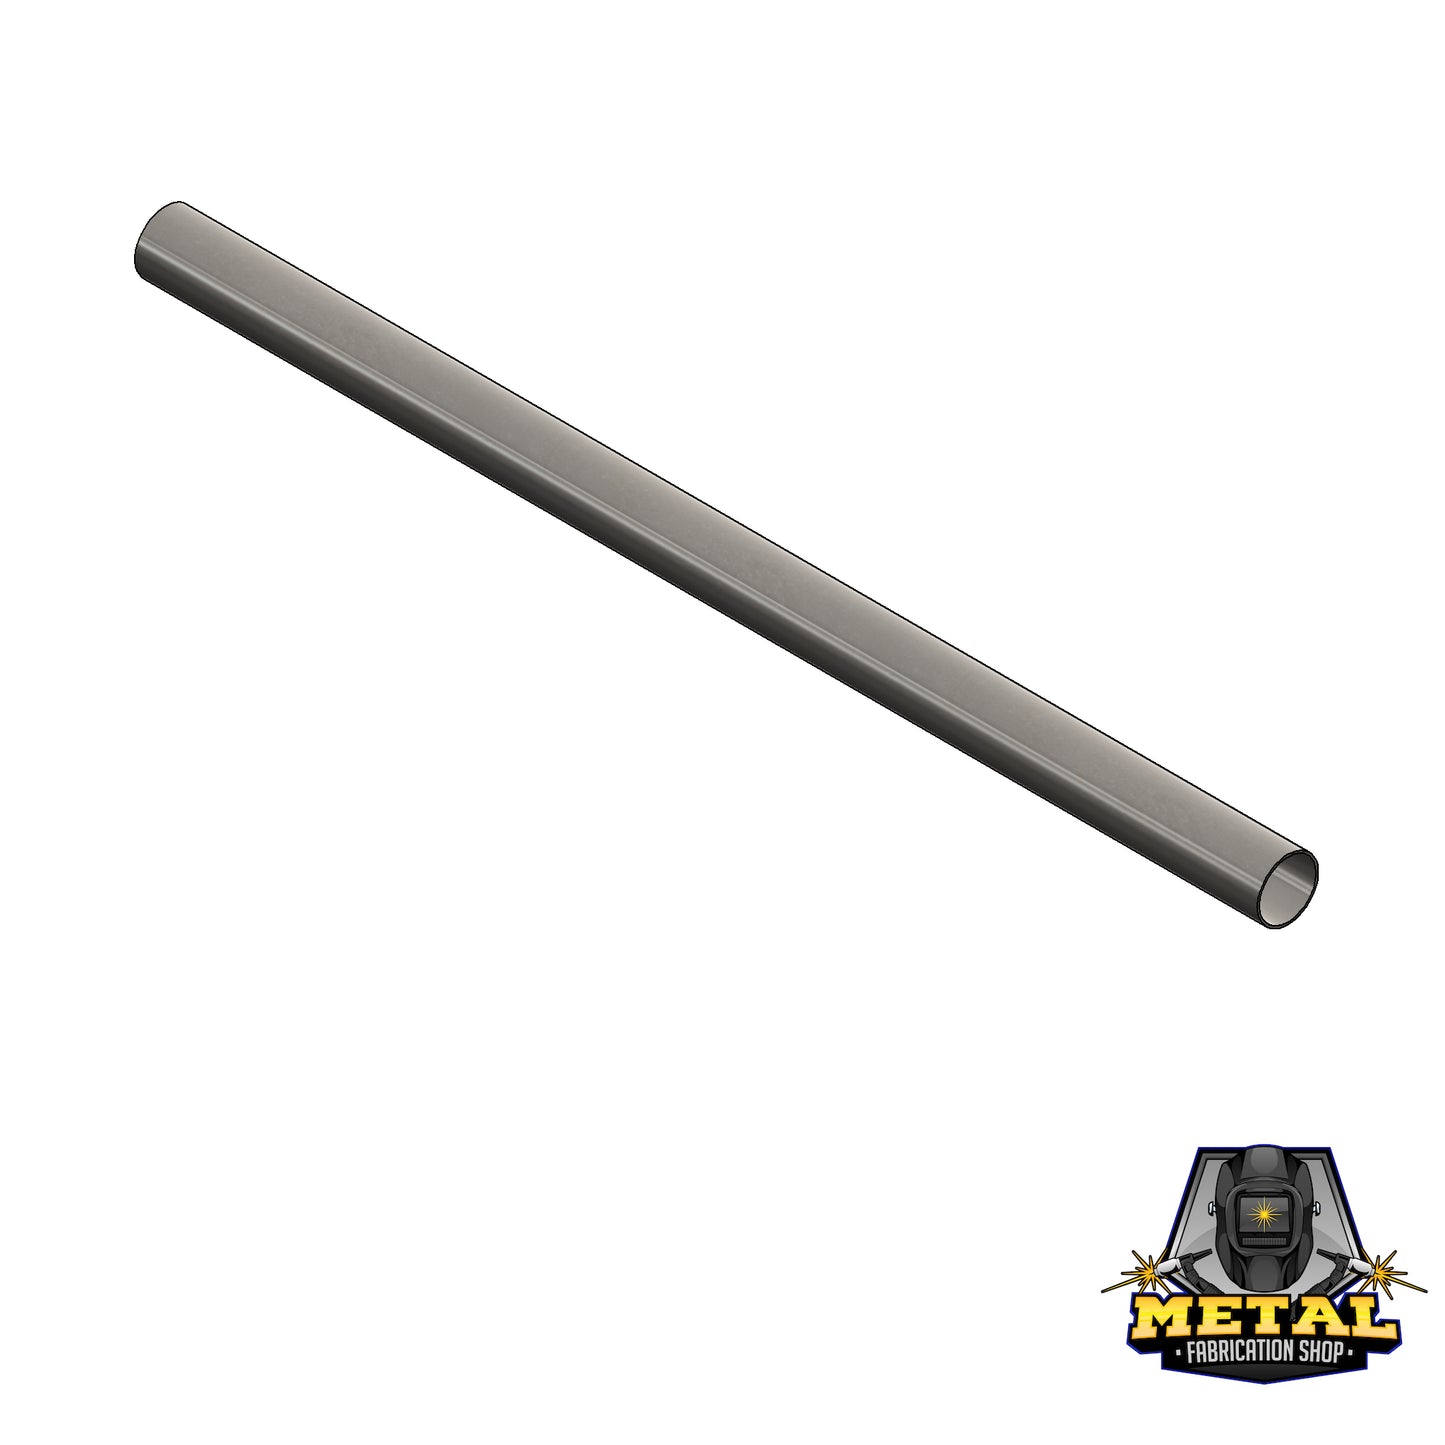 1-5/8" OD x 16 Gauge 304 Stainless Steel Round Tube